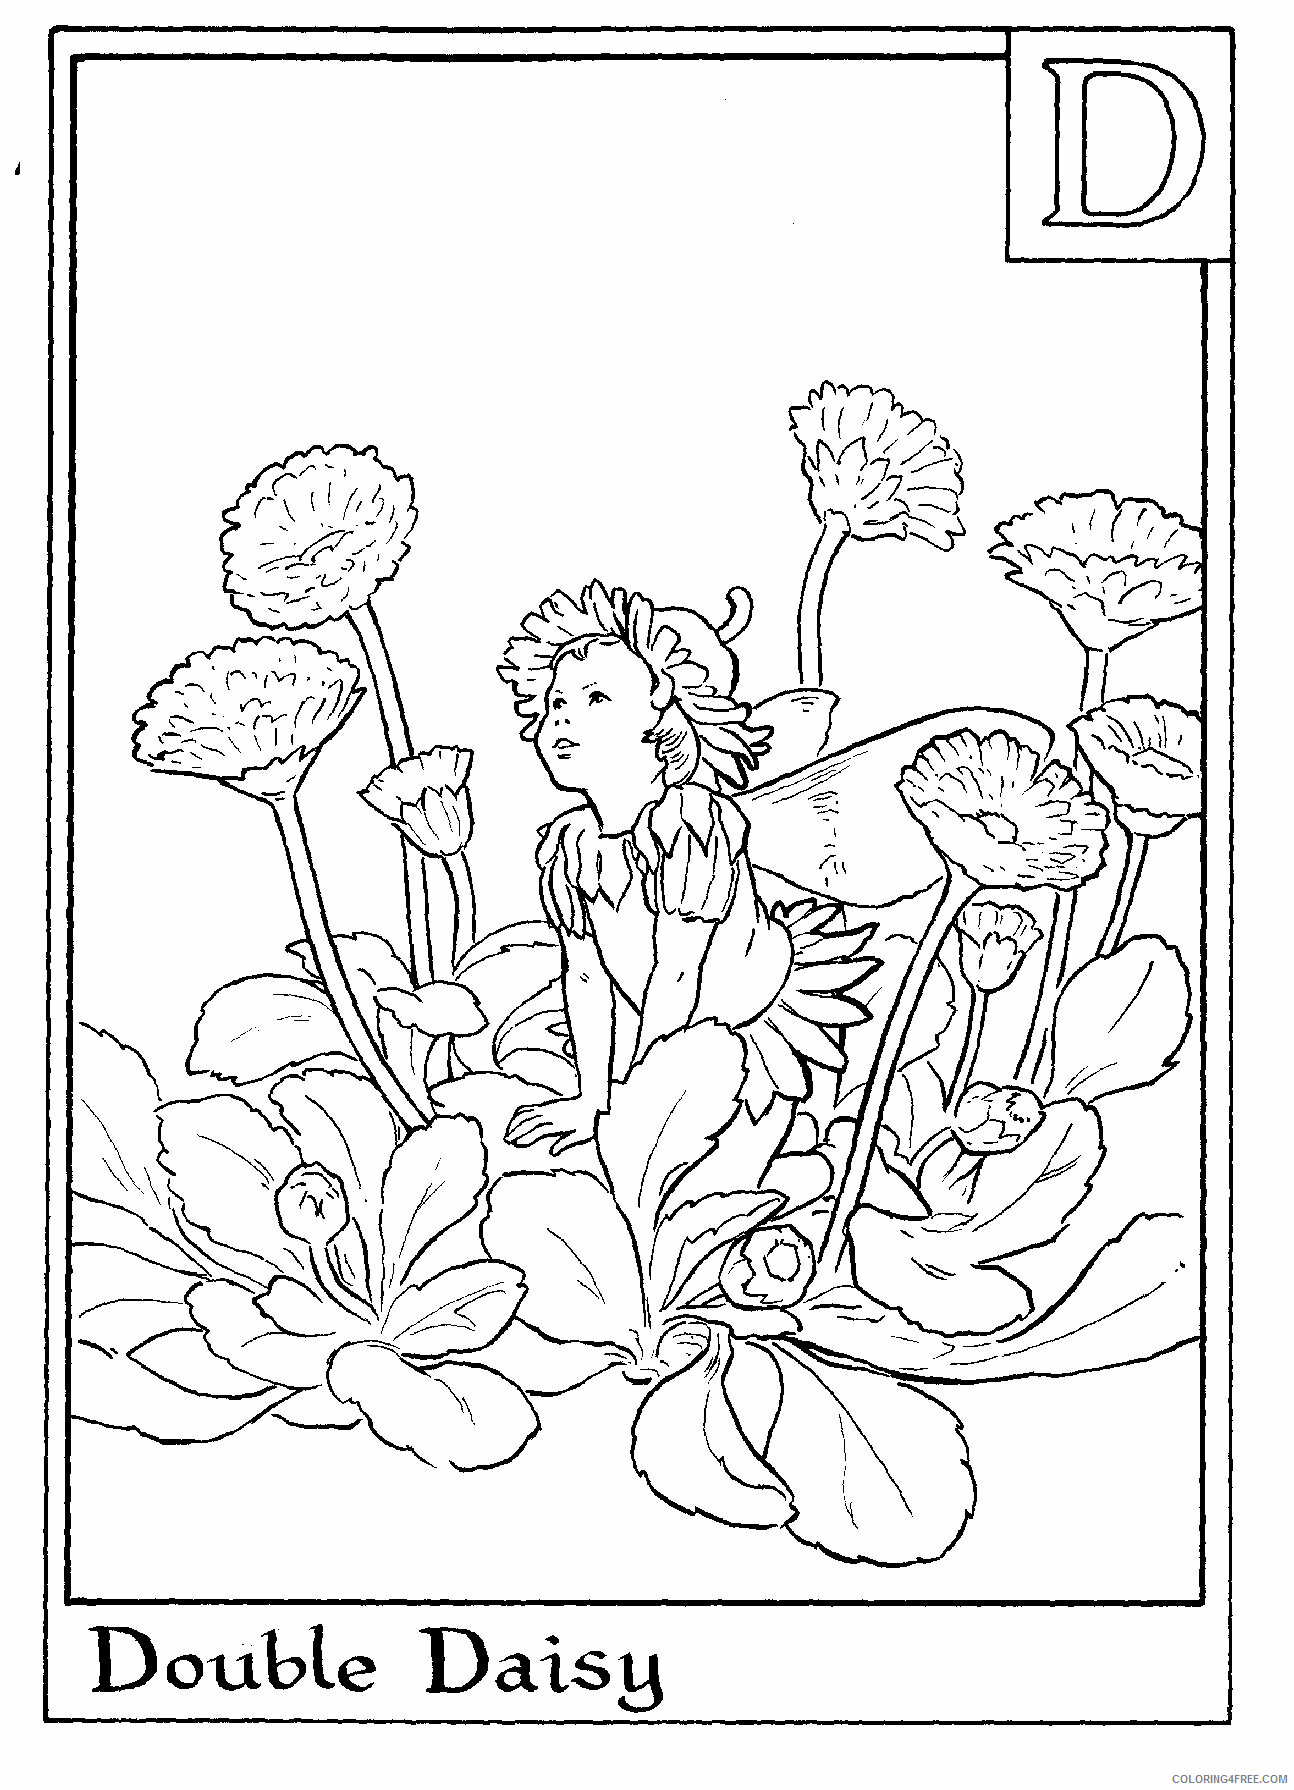 Alphabet Fairies Coloring Pages Printable Sheets Letter S For Strawberry Flower 2021 a 4879 Coloring4free